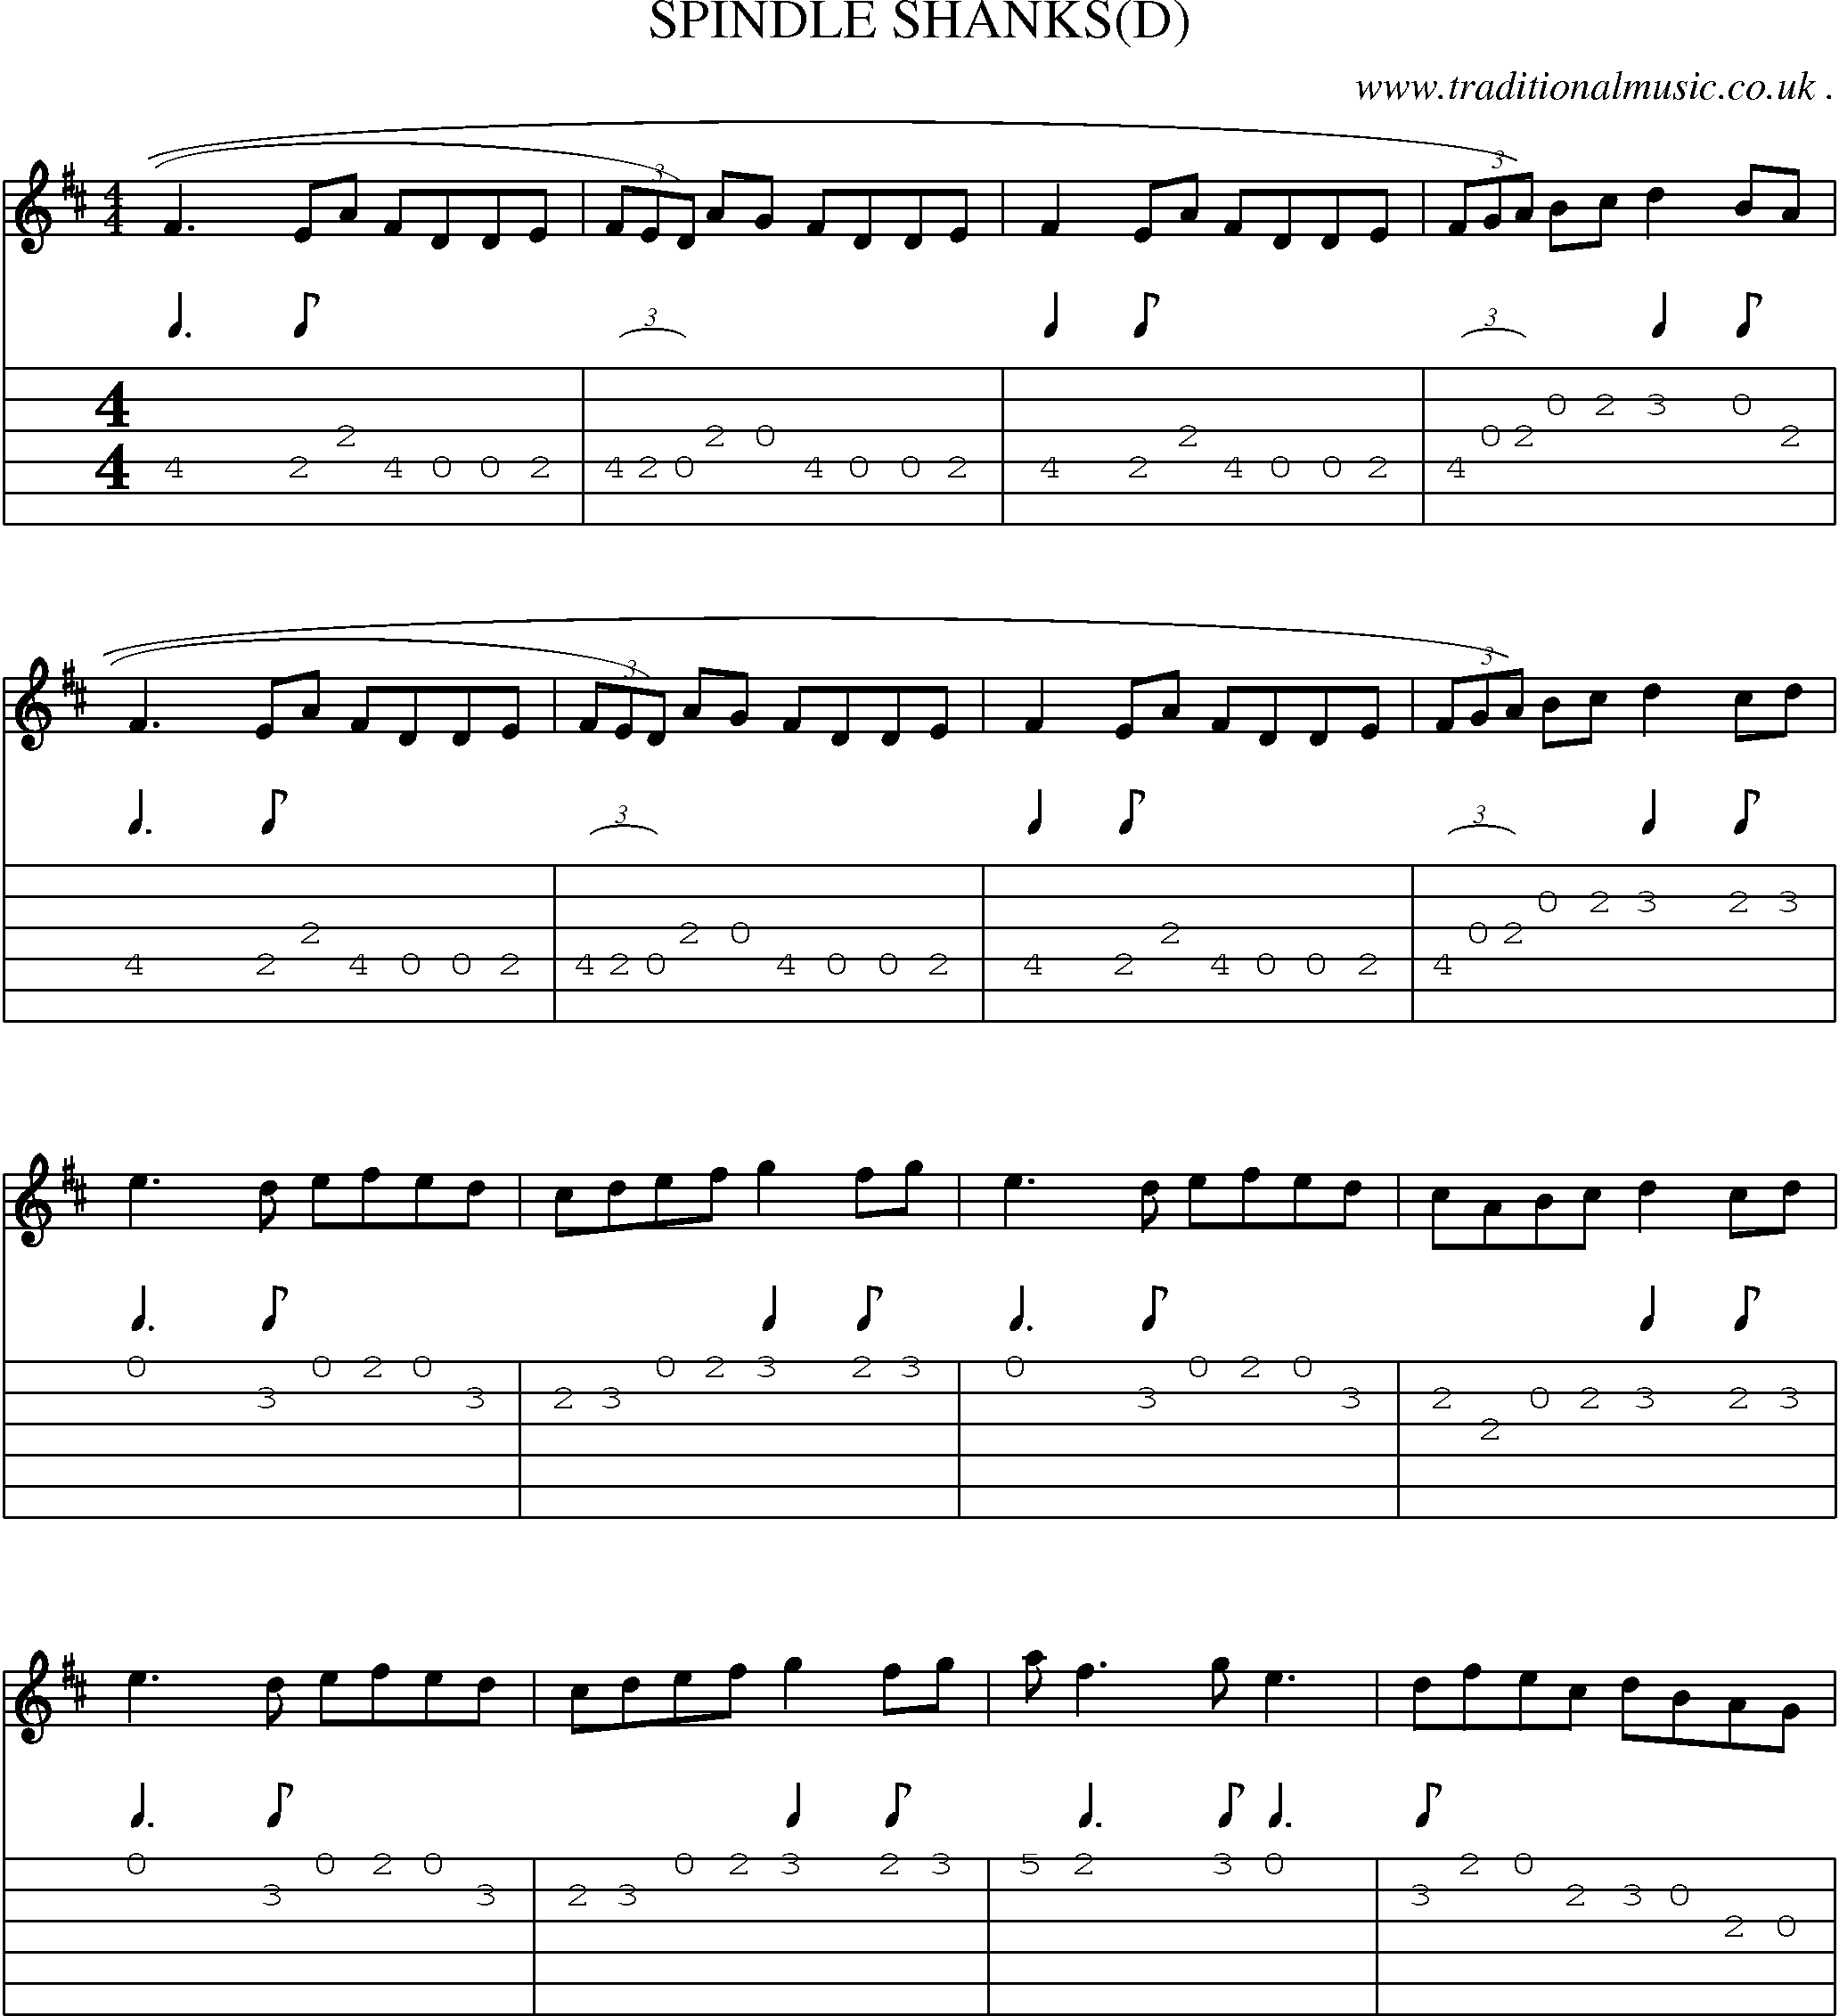 Sheet-Music and Guitar Tabs for Spindle Shanks(d)